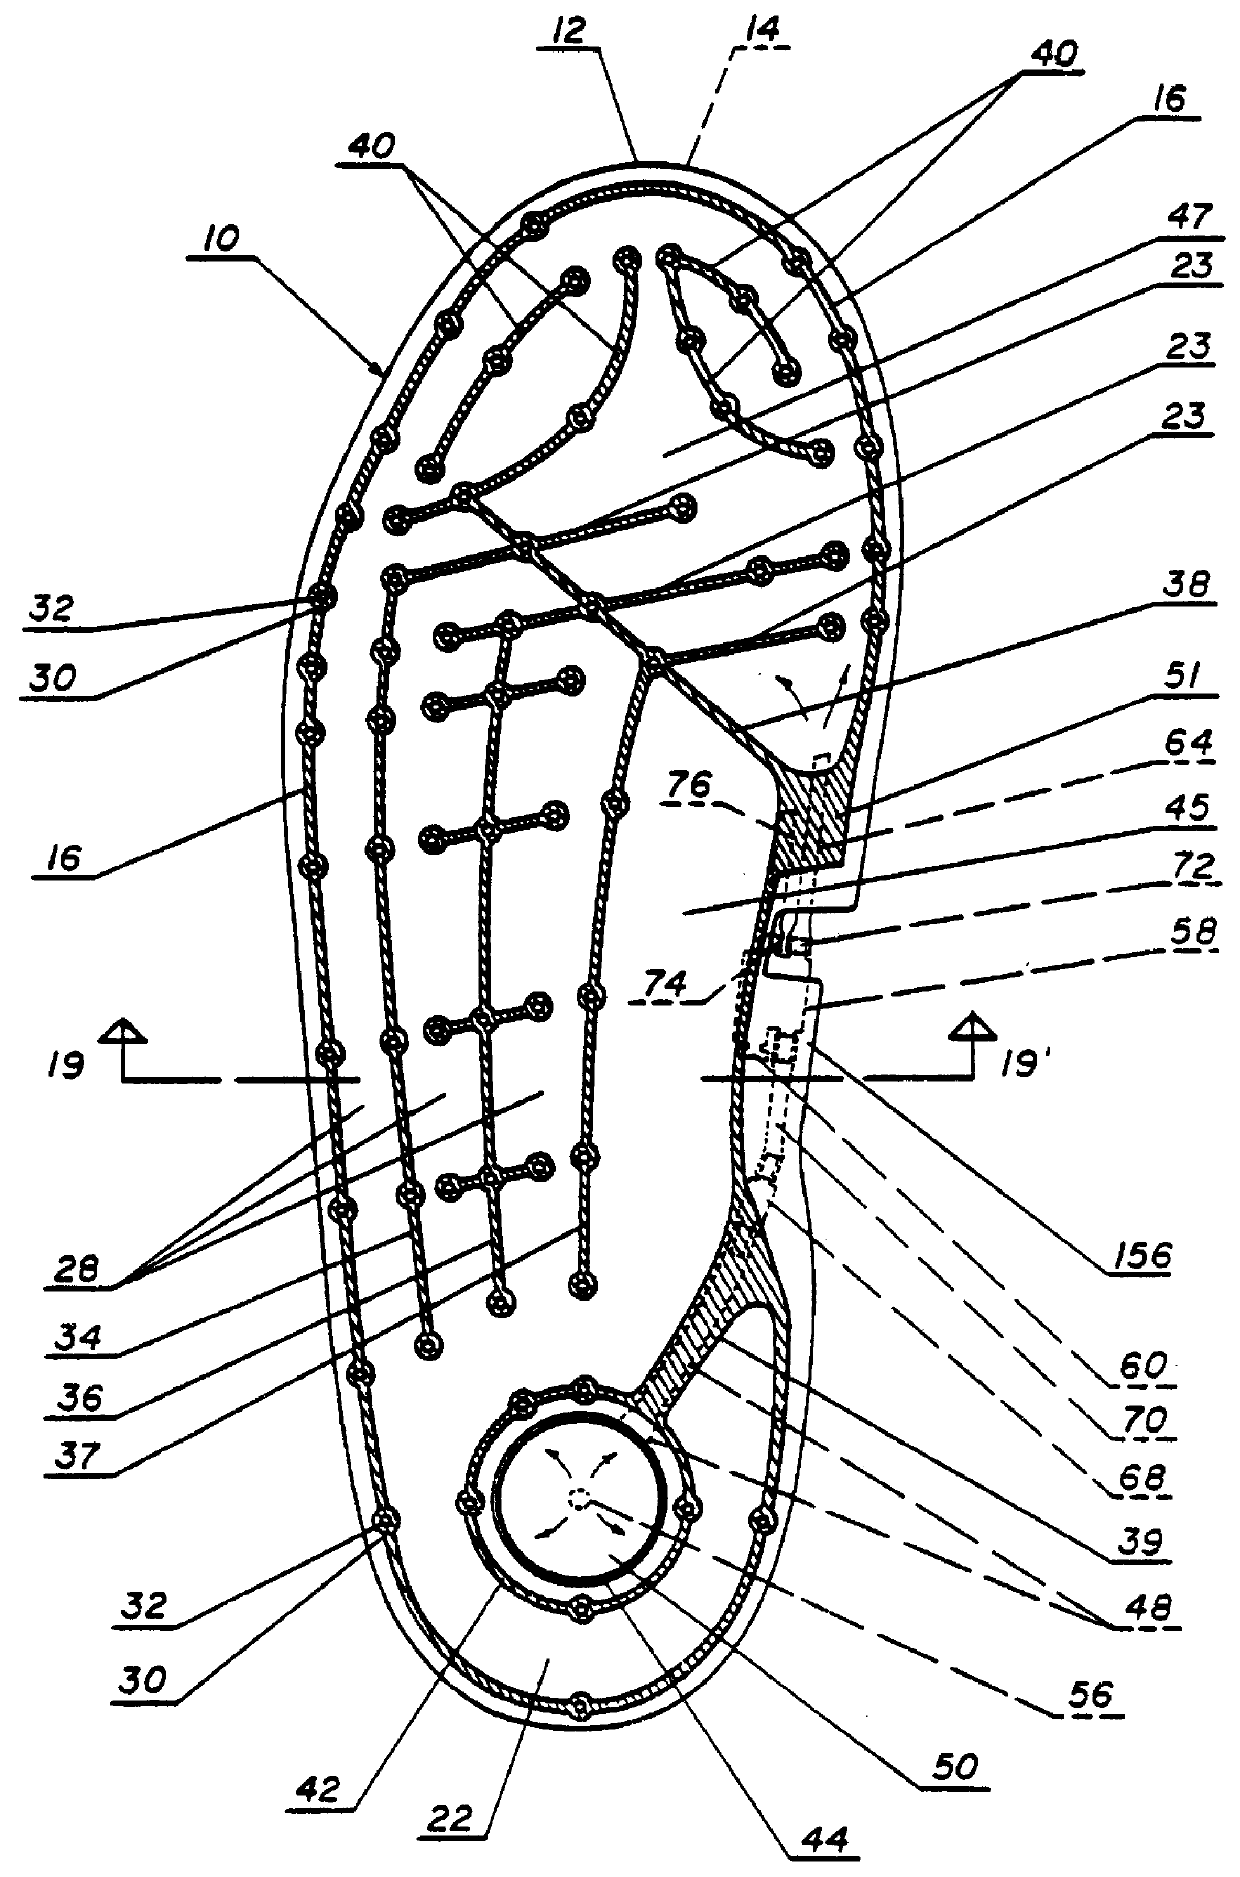 Inflatable sole lining for shoes and boots